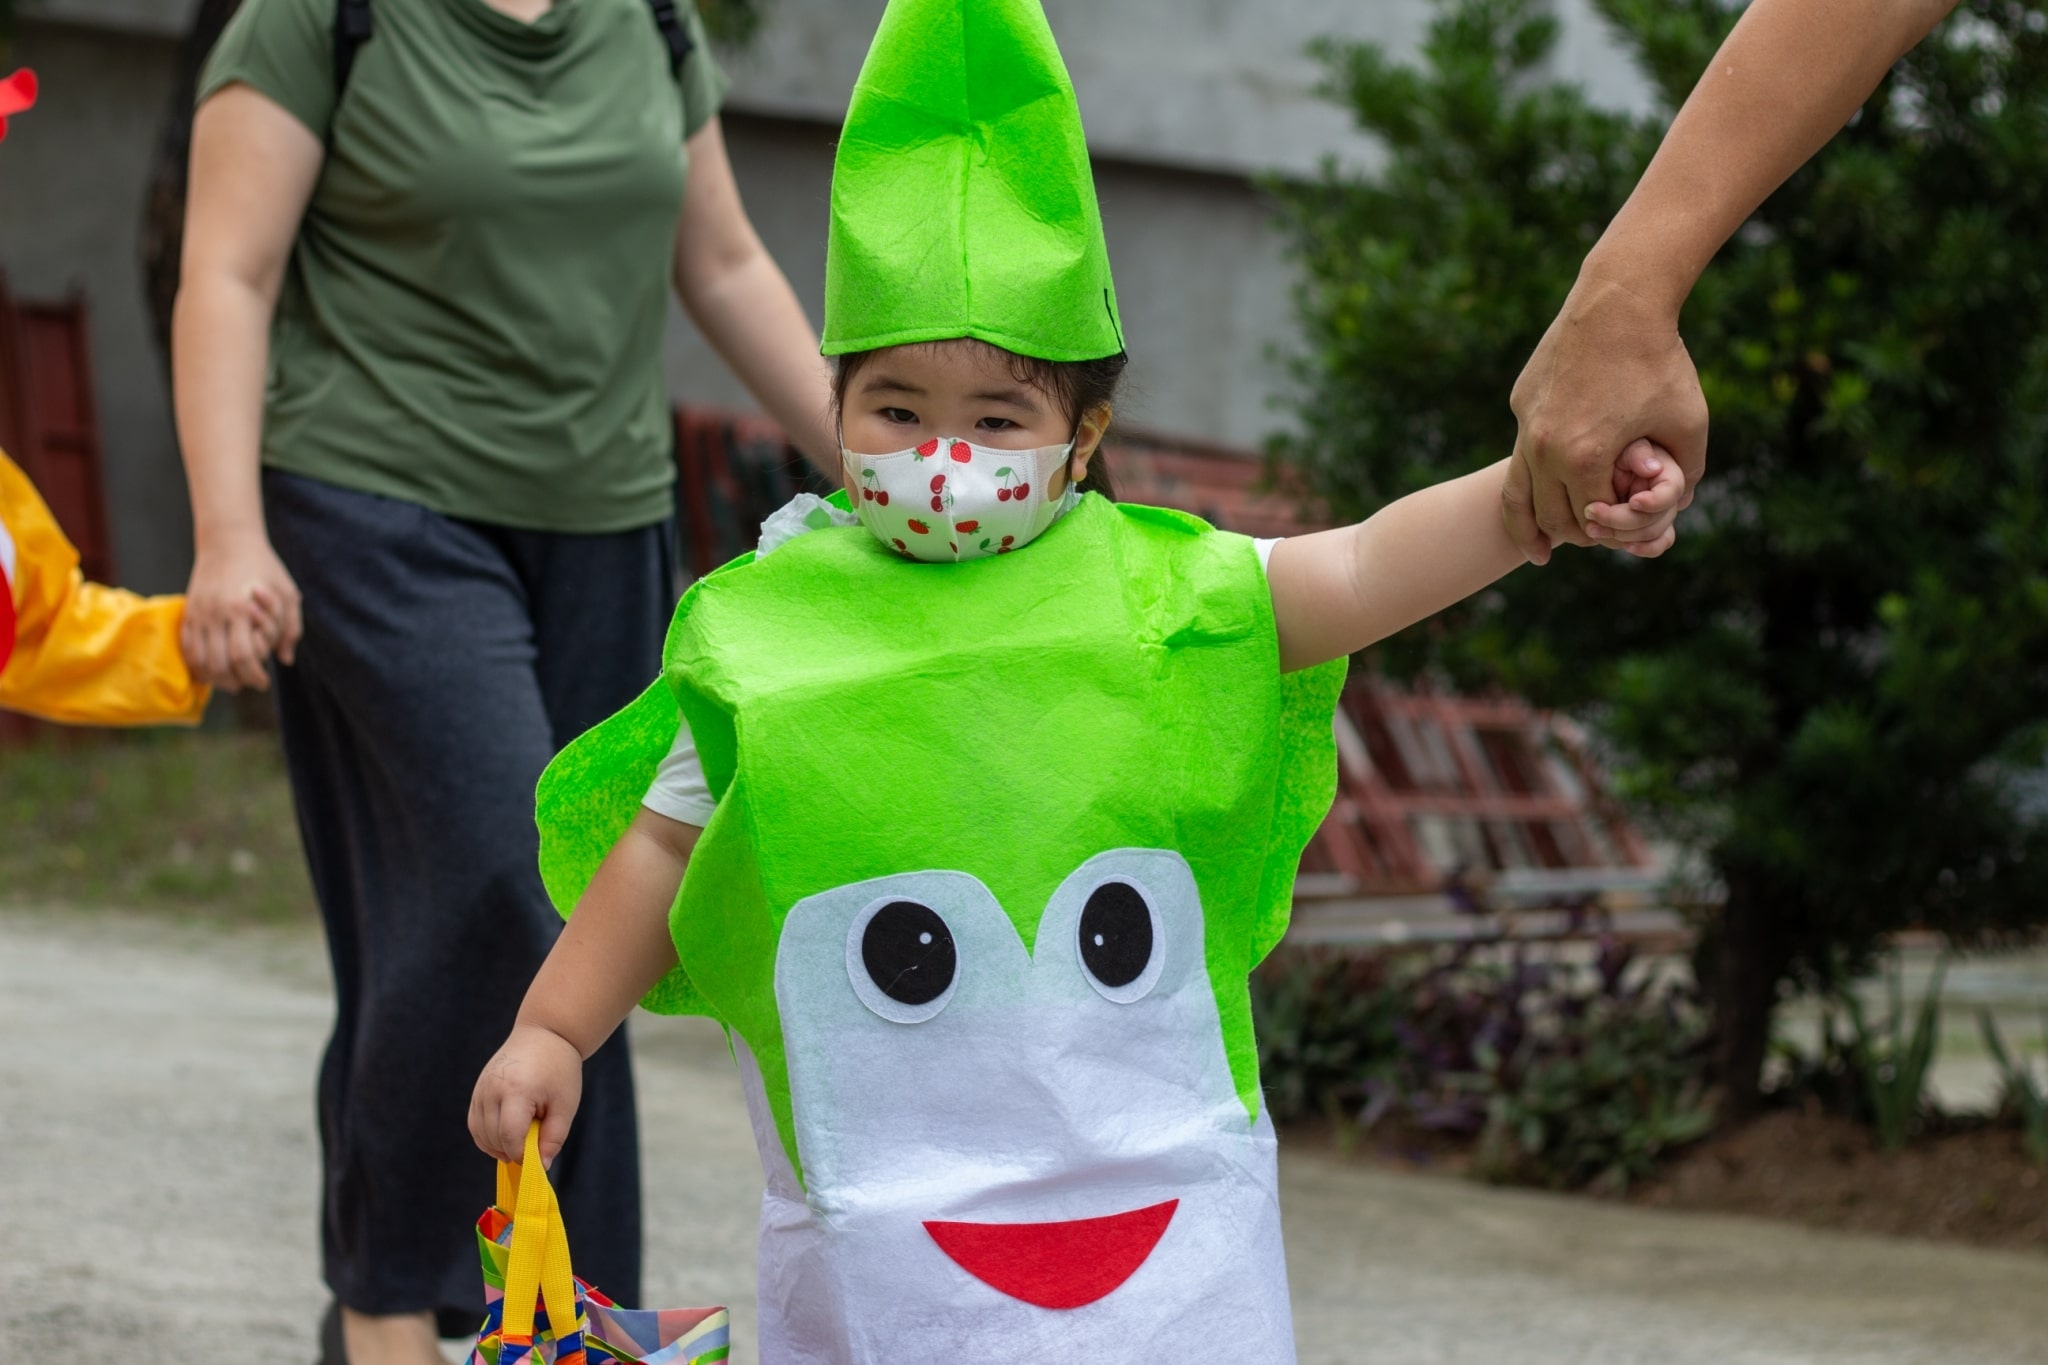 Preschool student dresses up as a Chinese cabbage (Pechay) in Tzu Chi Great Love Preschool’s Trick-or-Treat. 【Photo by Jeaneal Dando】